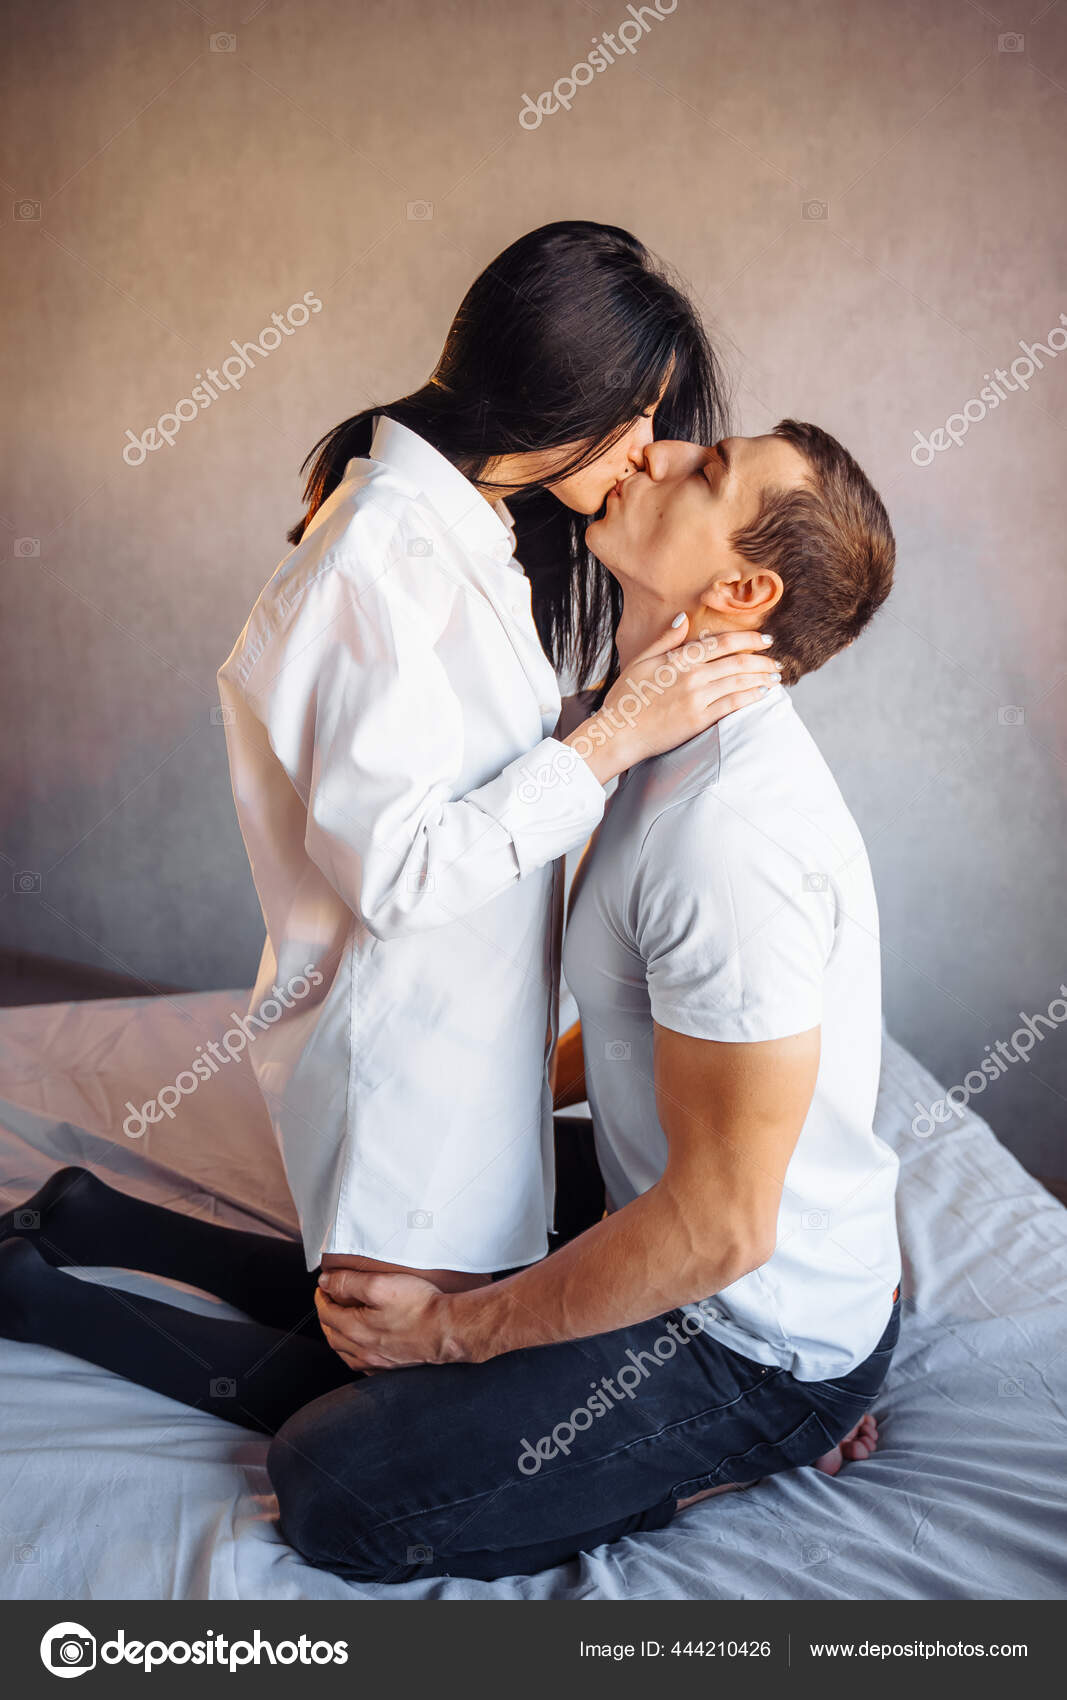 Attractive Young Couple Lovers Having Sex Home Bed Bright Room Stock Photo by ©dariaagaf 444210426